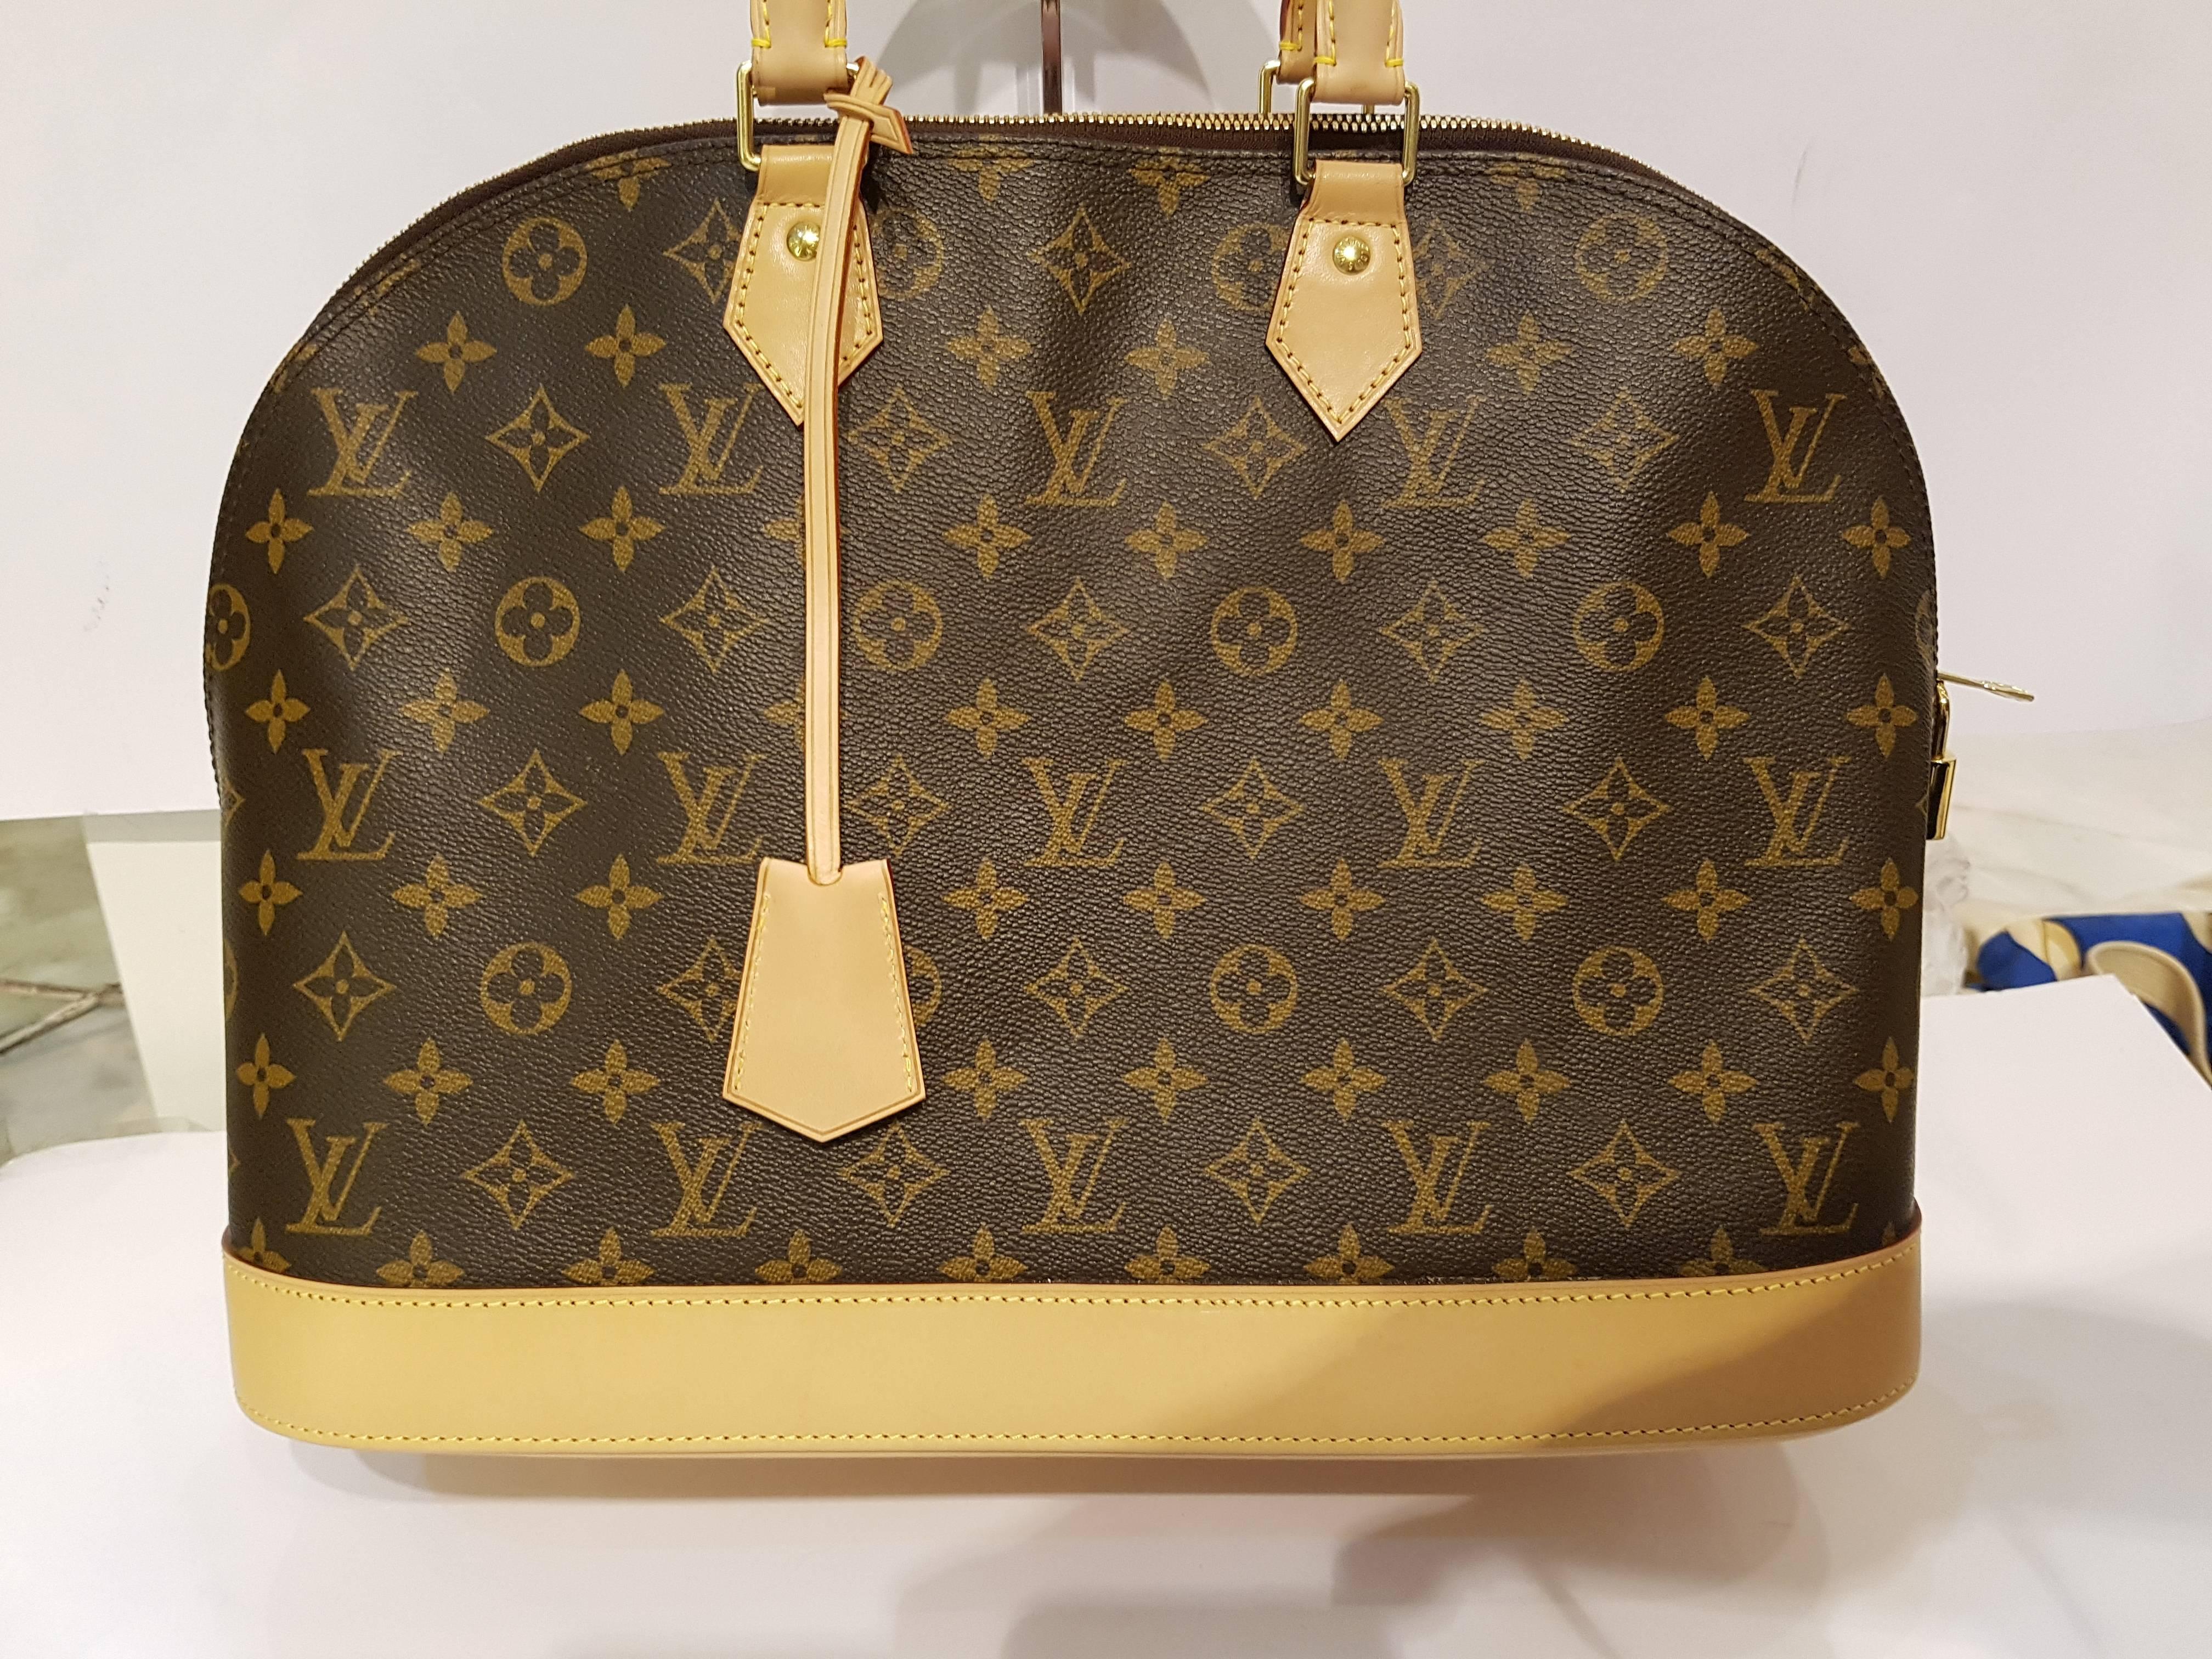 The most structured of the iconic Louis Vuitton handbags. The original was the creation of Gaston Vuitton, who named it for the Alma Bridge, a span that connects two fashionable Paris neighborhoods. Shown here in signature Monogram canvas